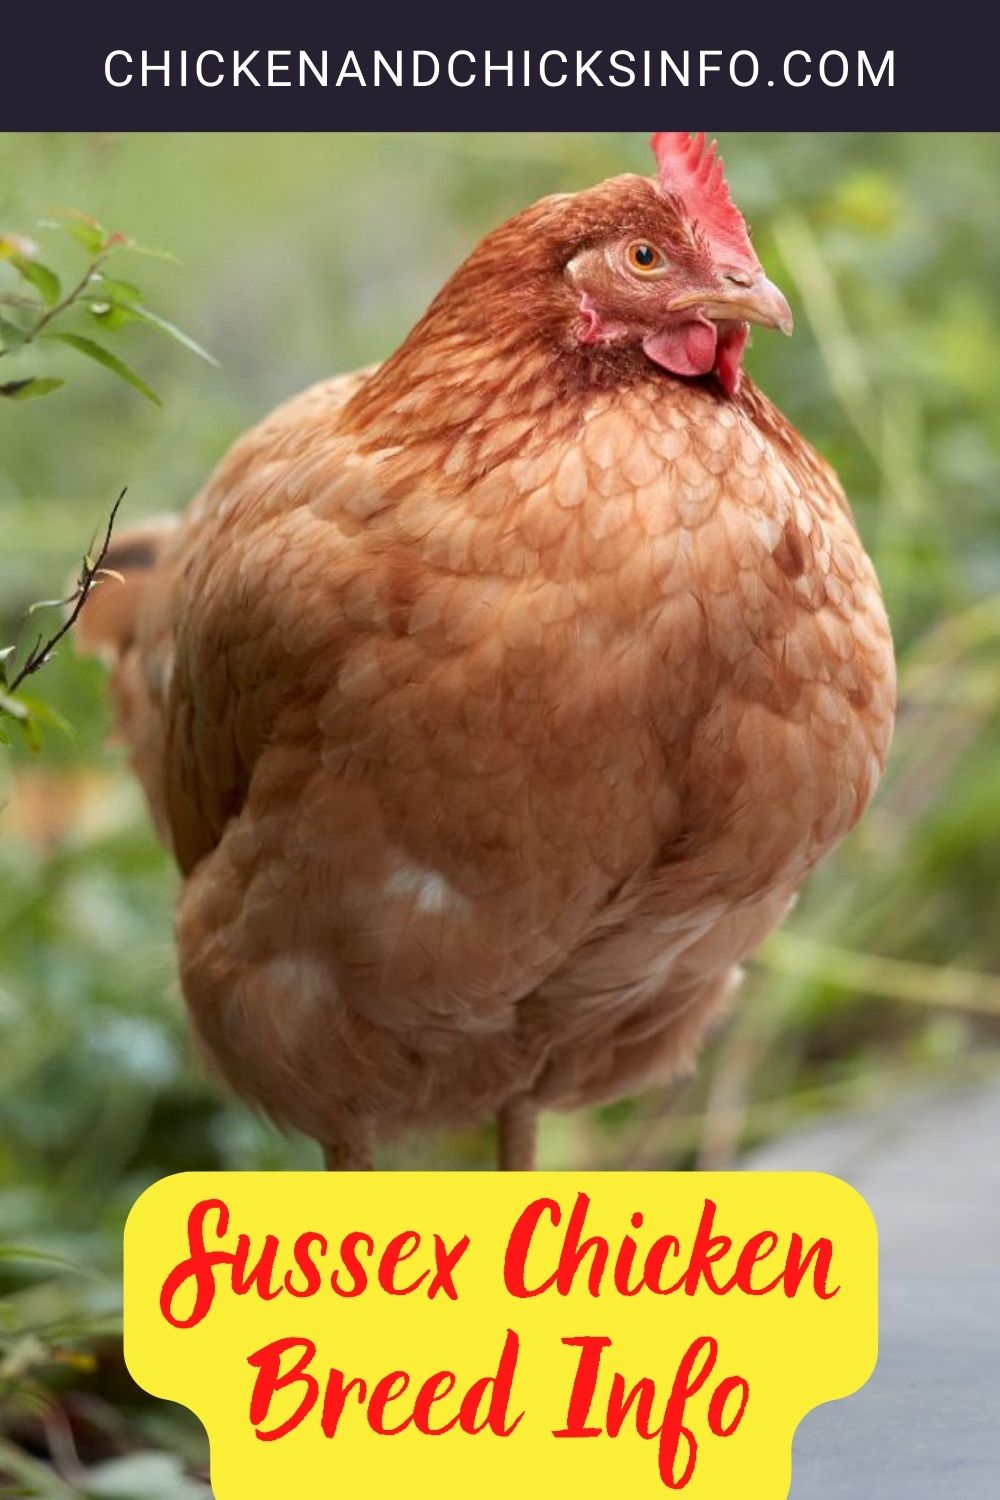 Sussex Chicken Breed Info + Where to Buy pinterest image.